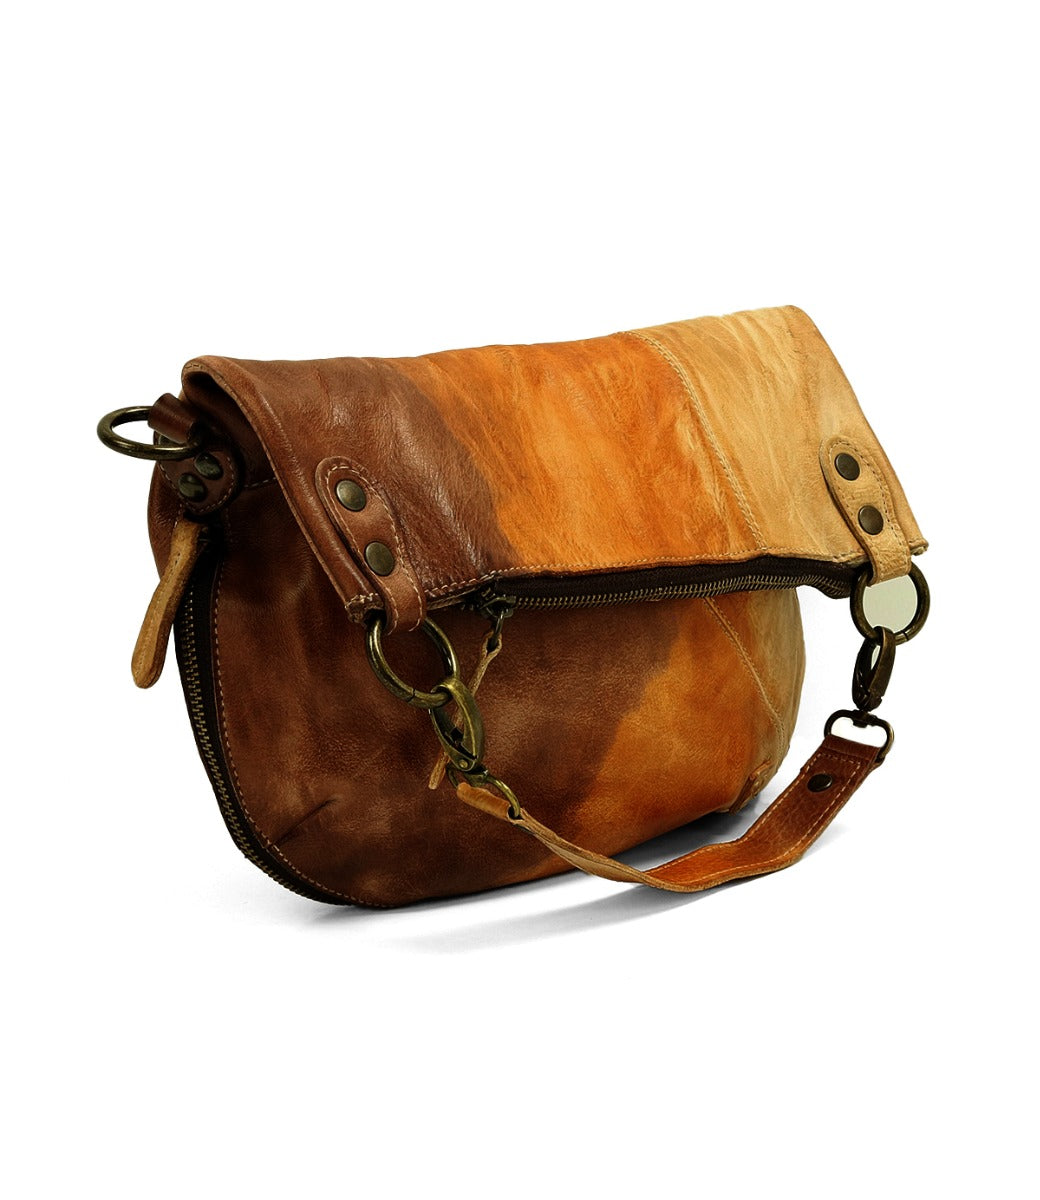 A Tahiti by Bed Stu brown and brown leather crossbody bag.